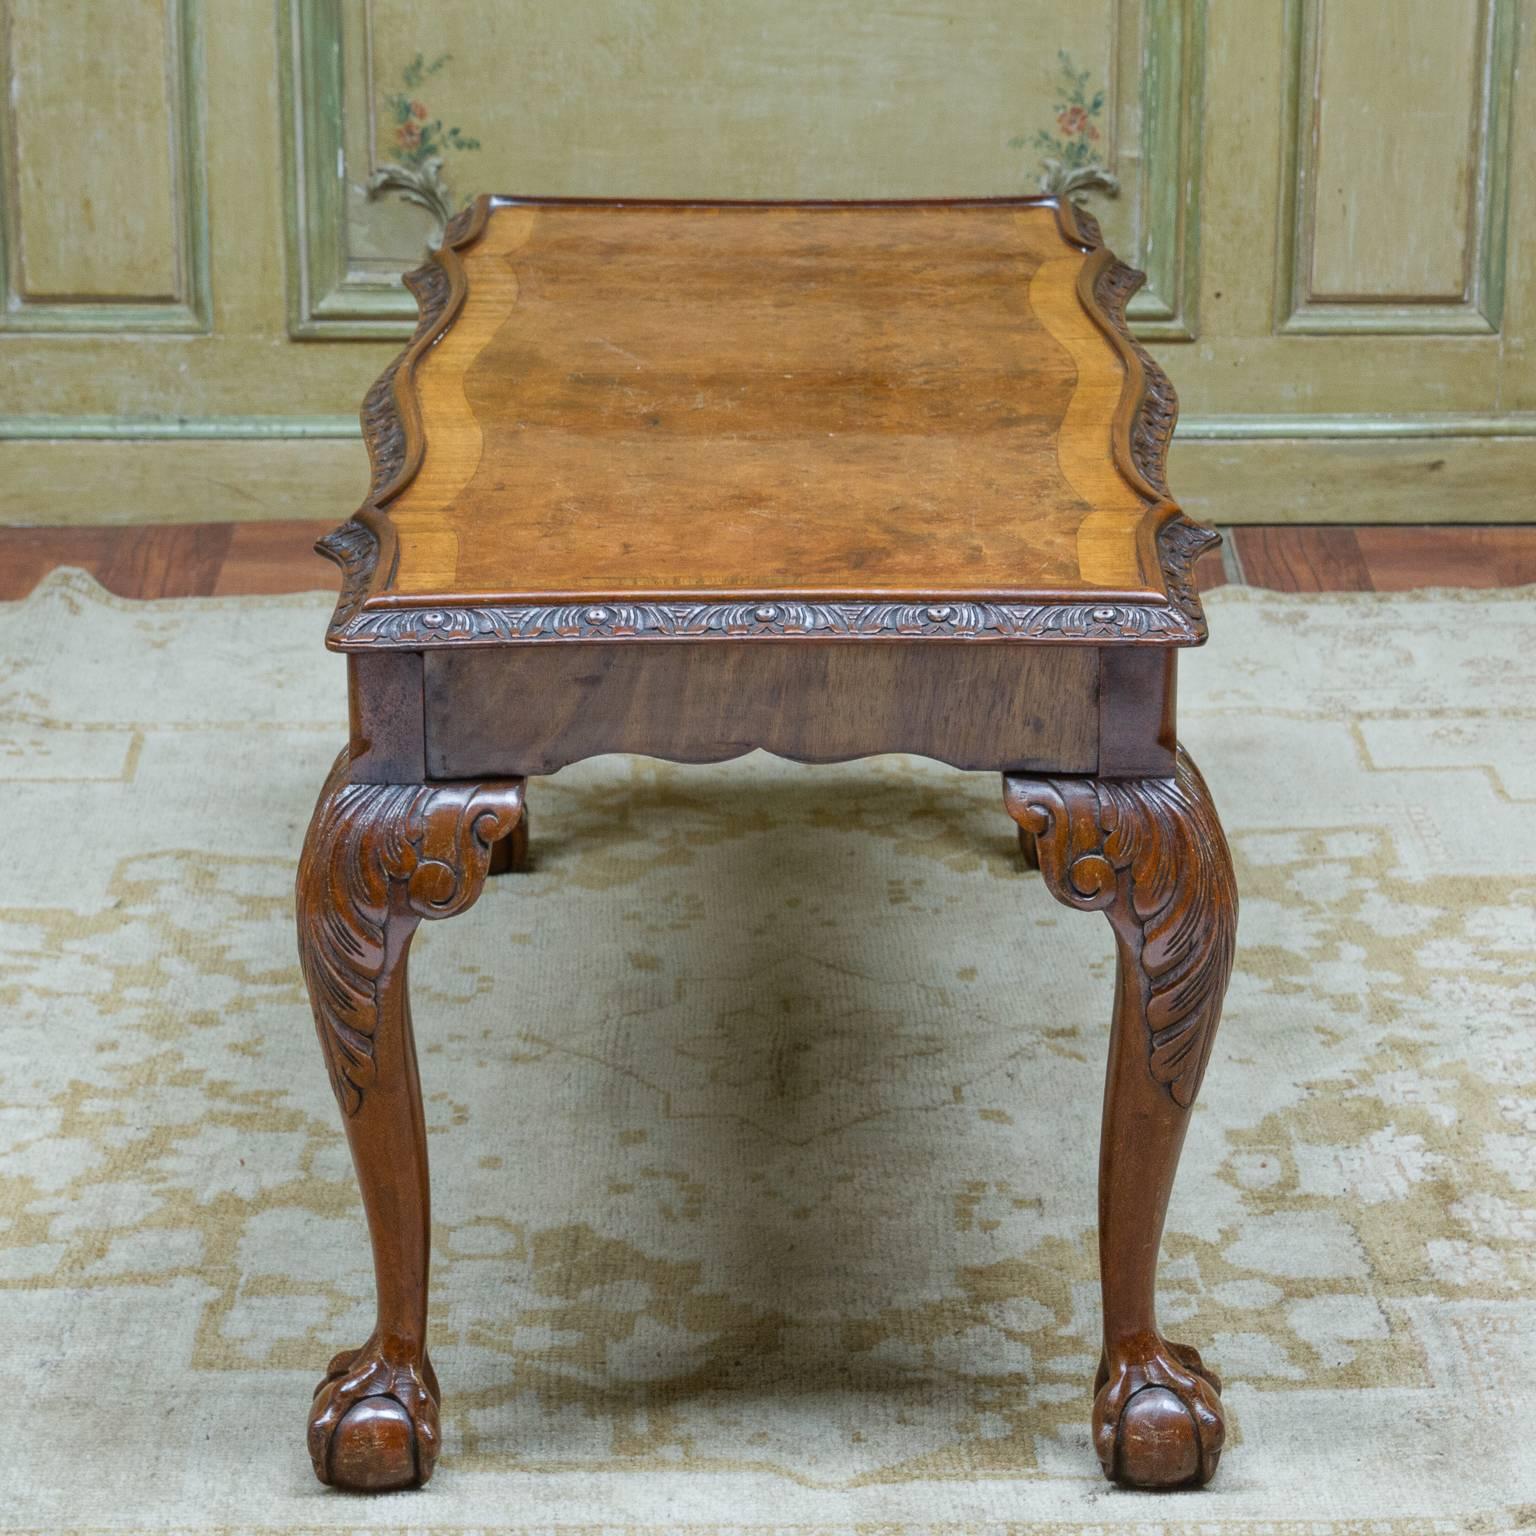 A 1920s English Chippendale walnut and burl walnut cocktail table. Shaped top with carved trim resting on four well carved cabriole legs, ending with a claw and ball foot & carved knees. Can accommodate glass, 1920s.